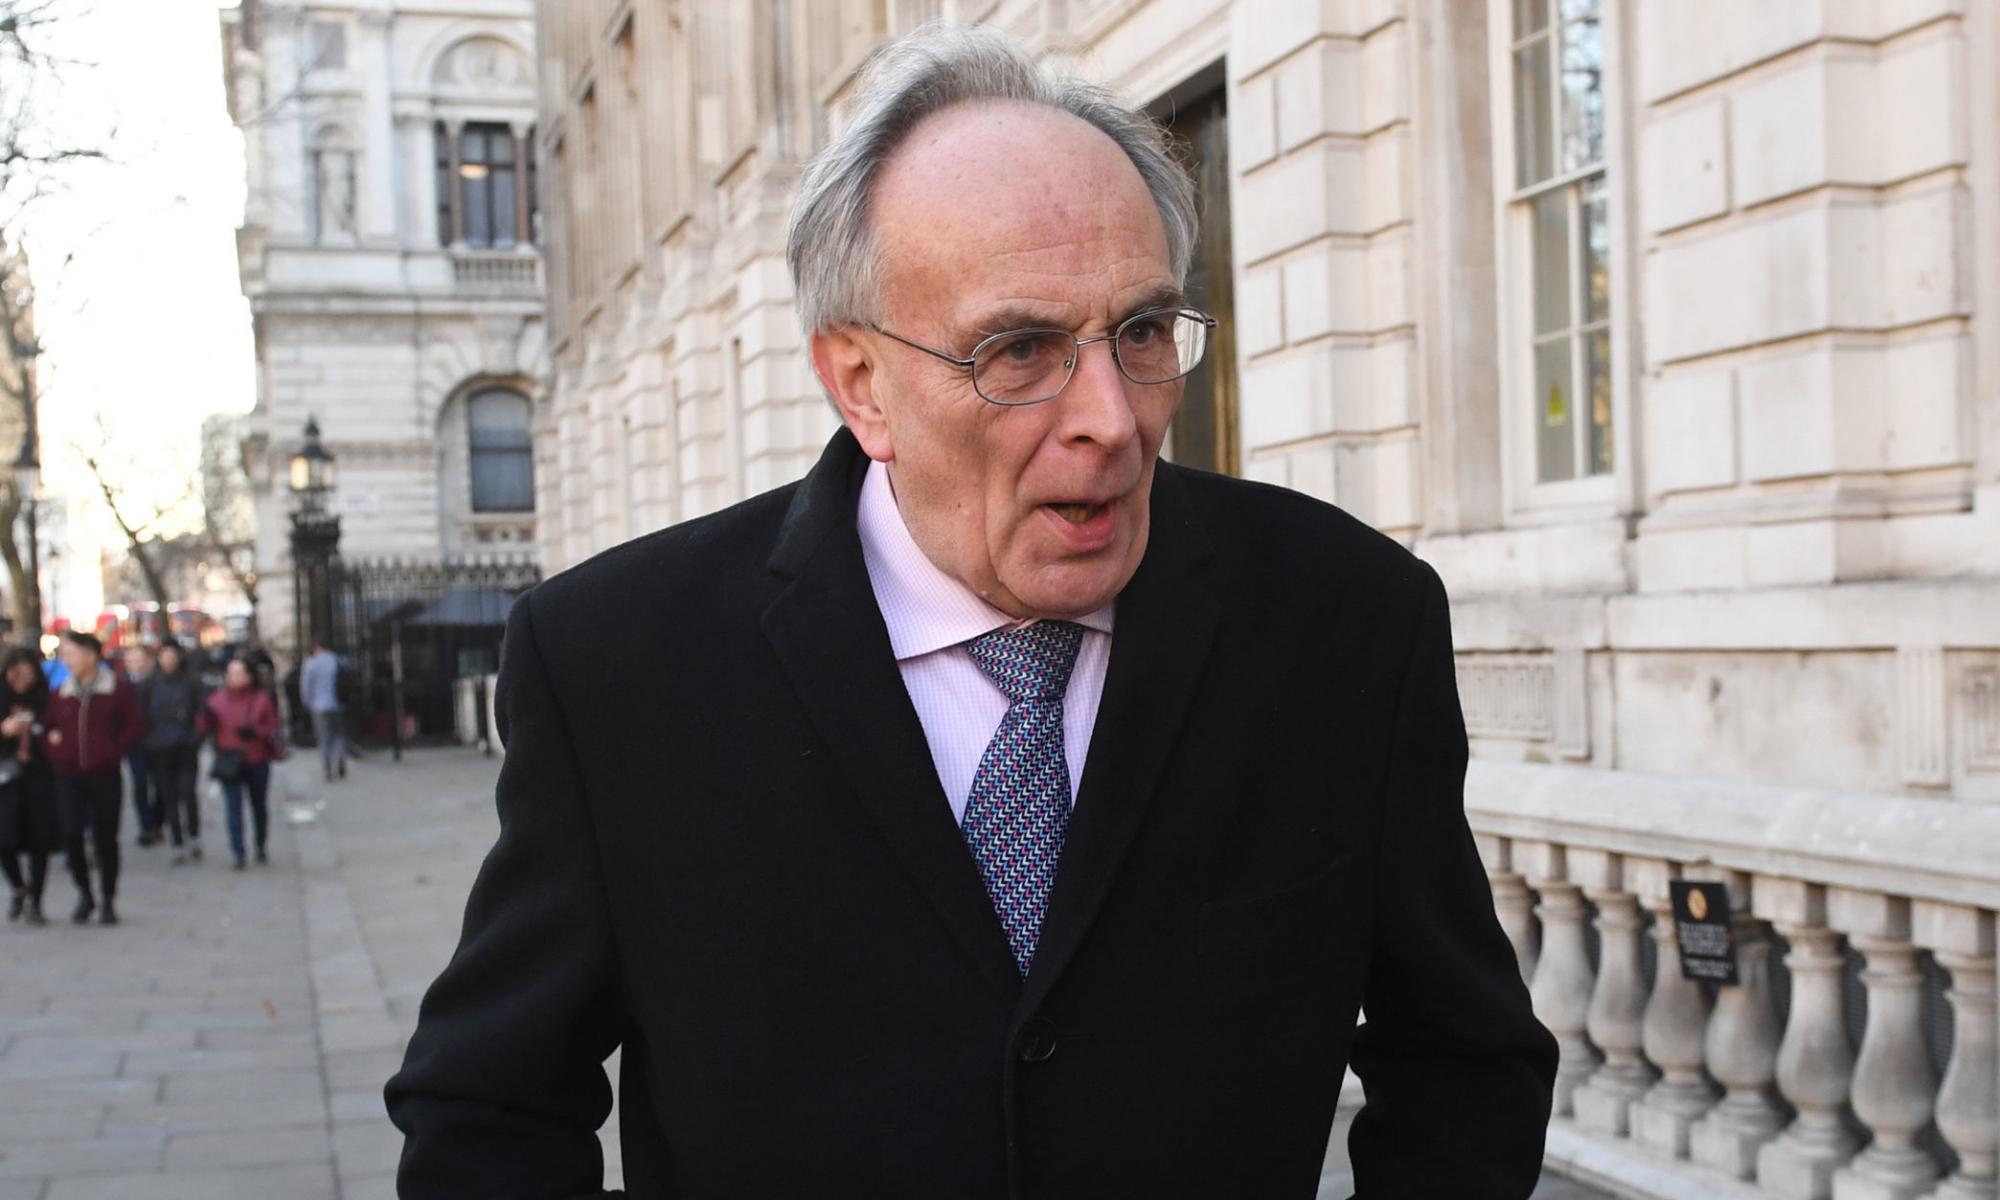 tories choose peter bone’s partner as candidate to replace him